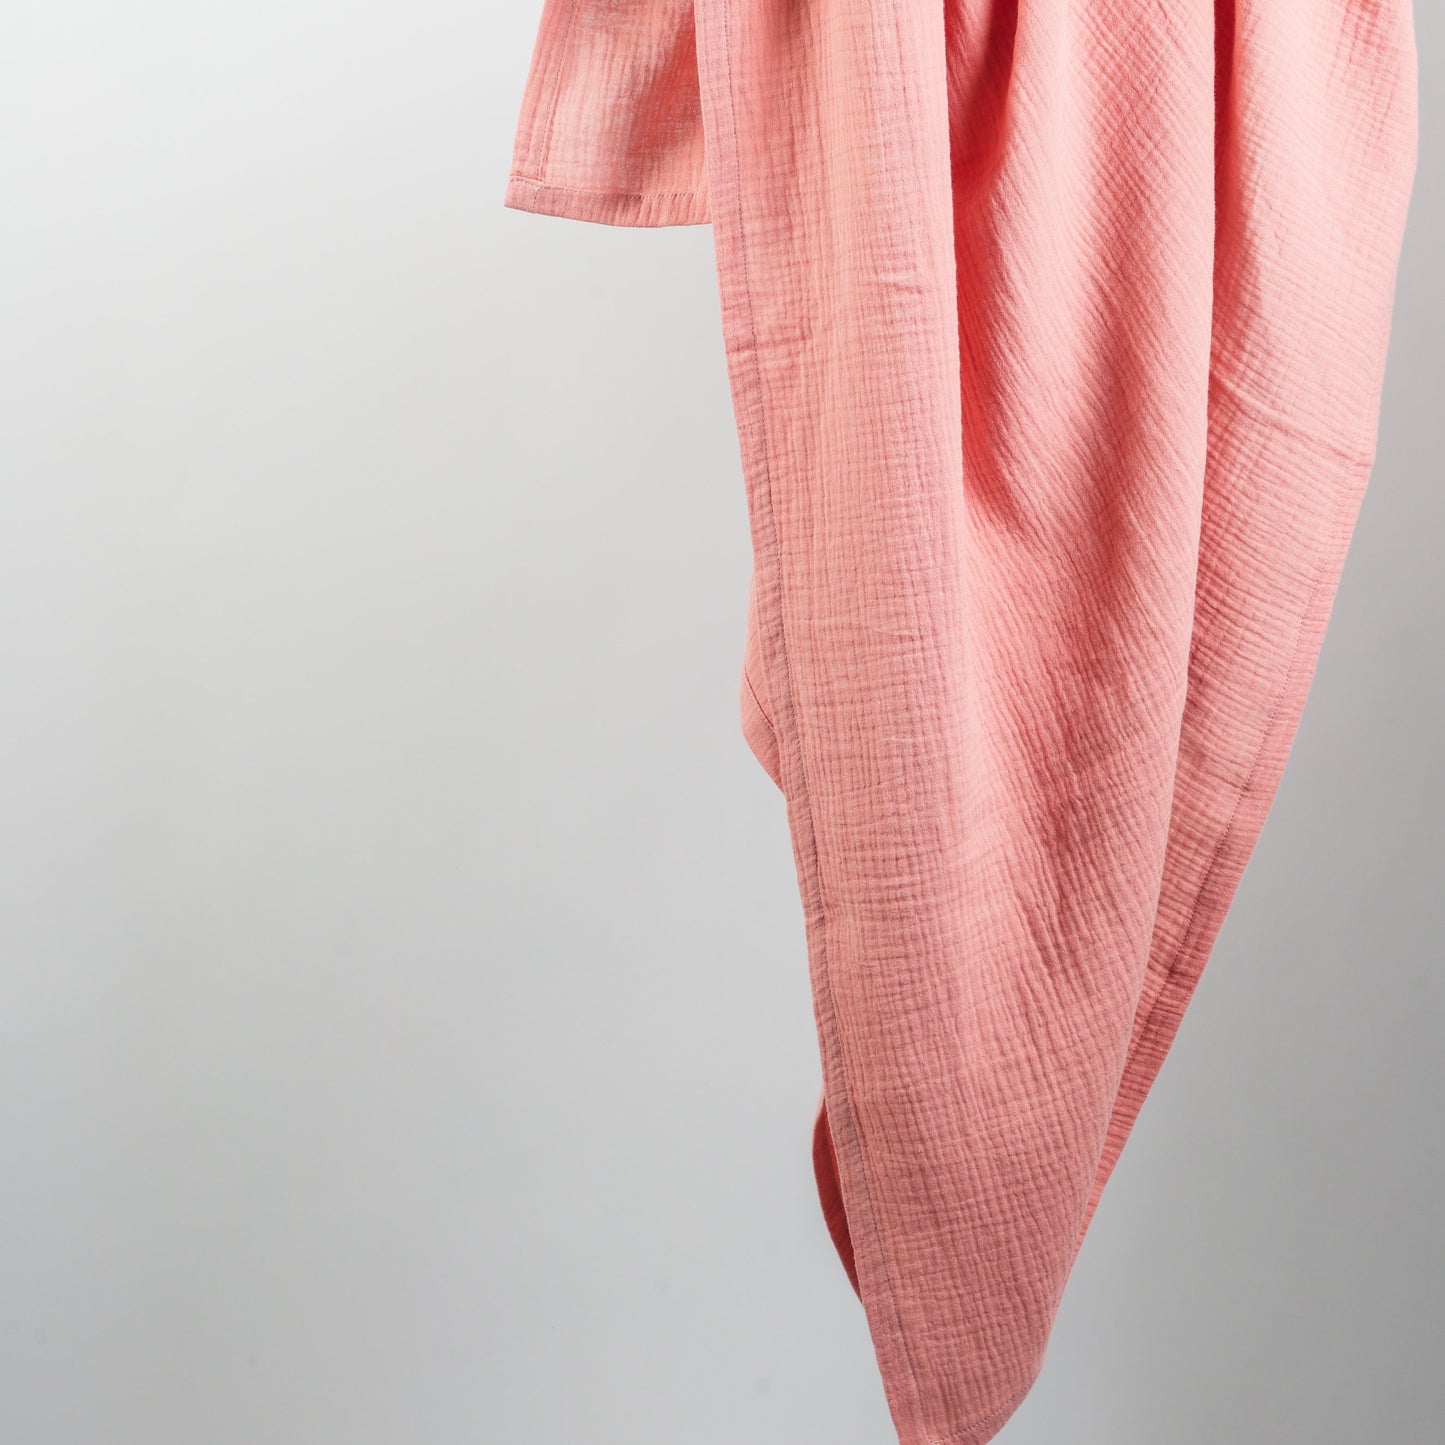 Organic Cotton Swaddle in Dusty Pink - WERONE